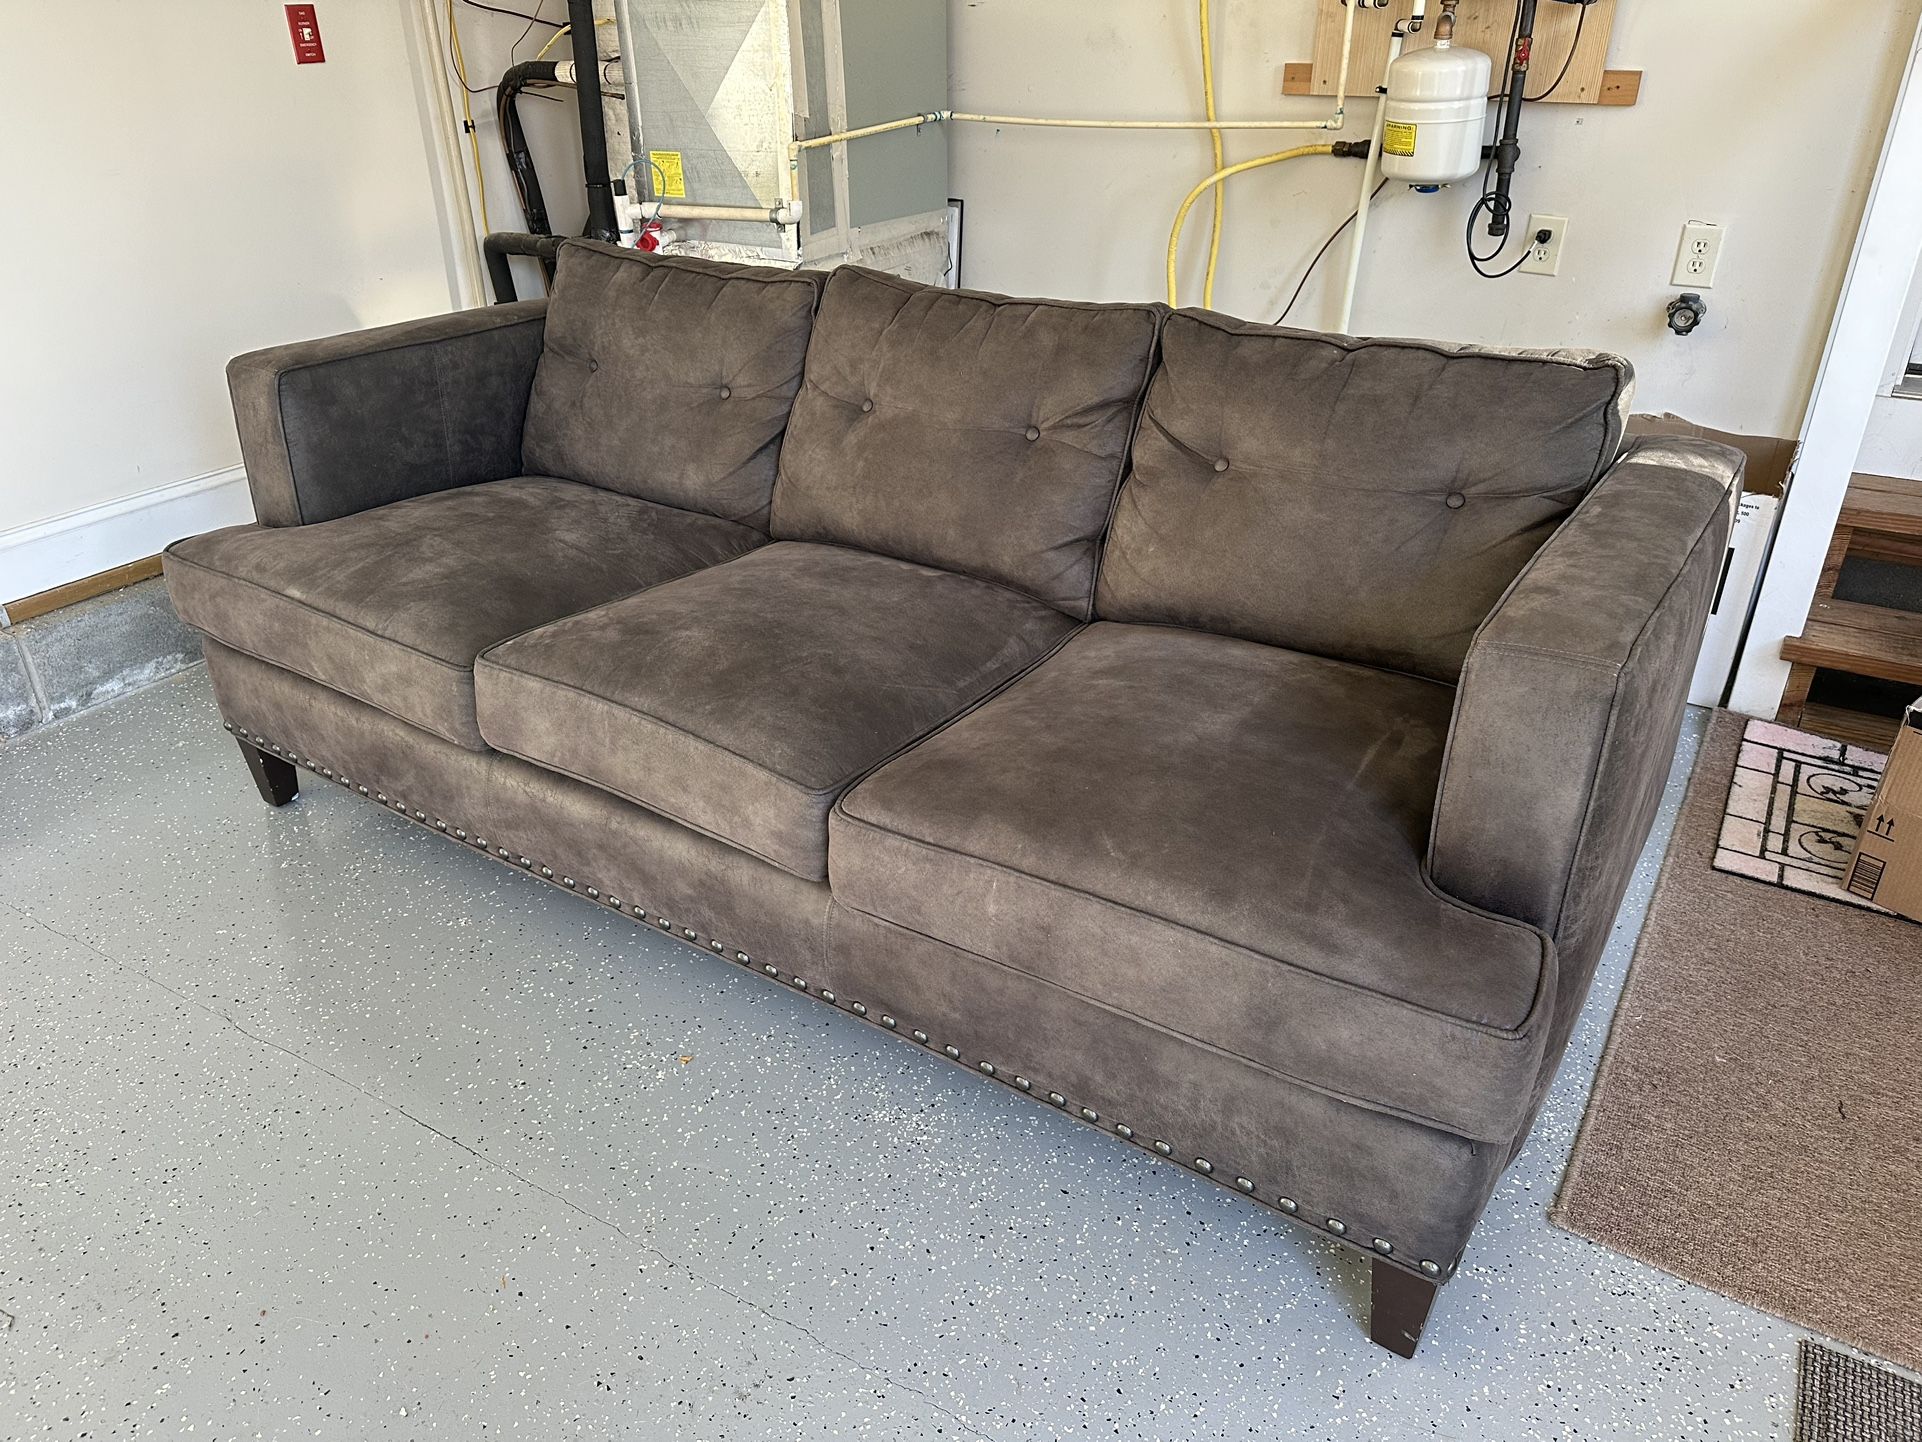 FREE DELIVERY - Arhaus Sofa 